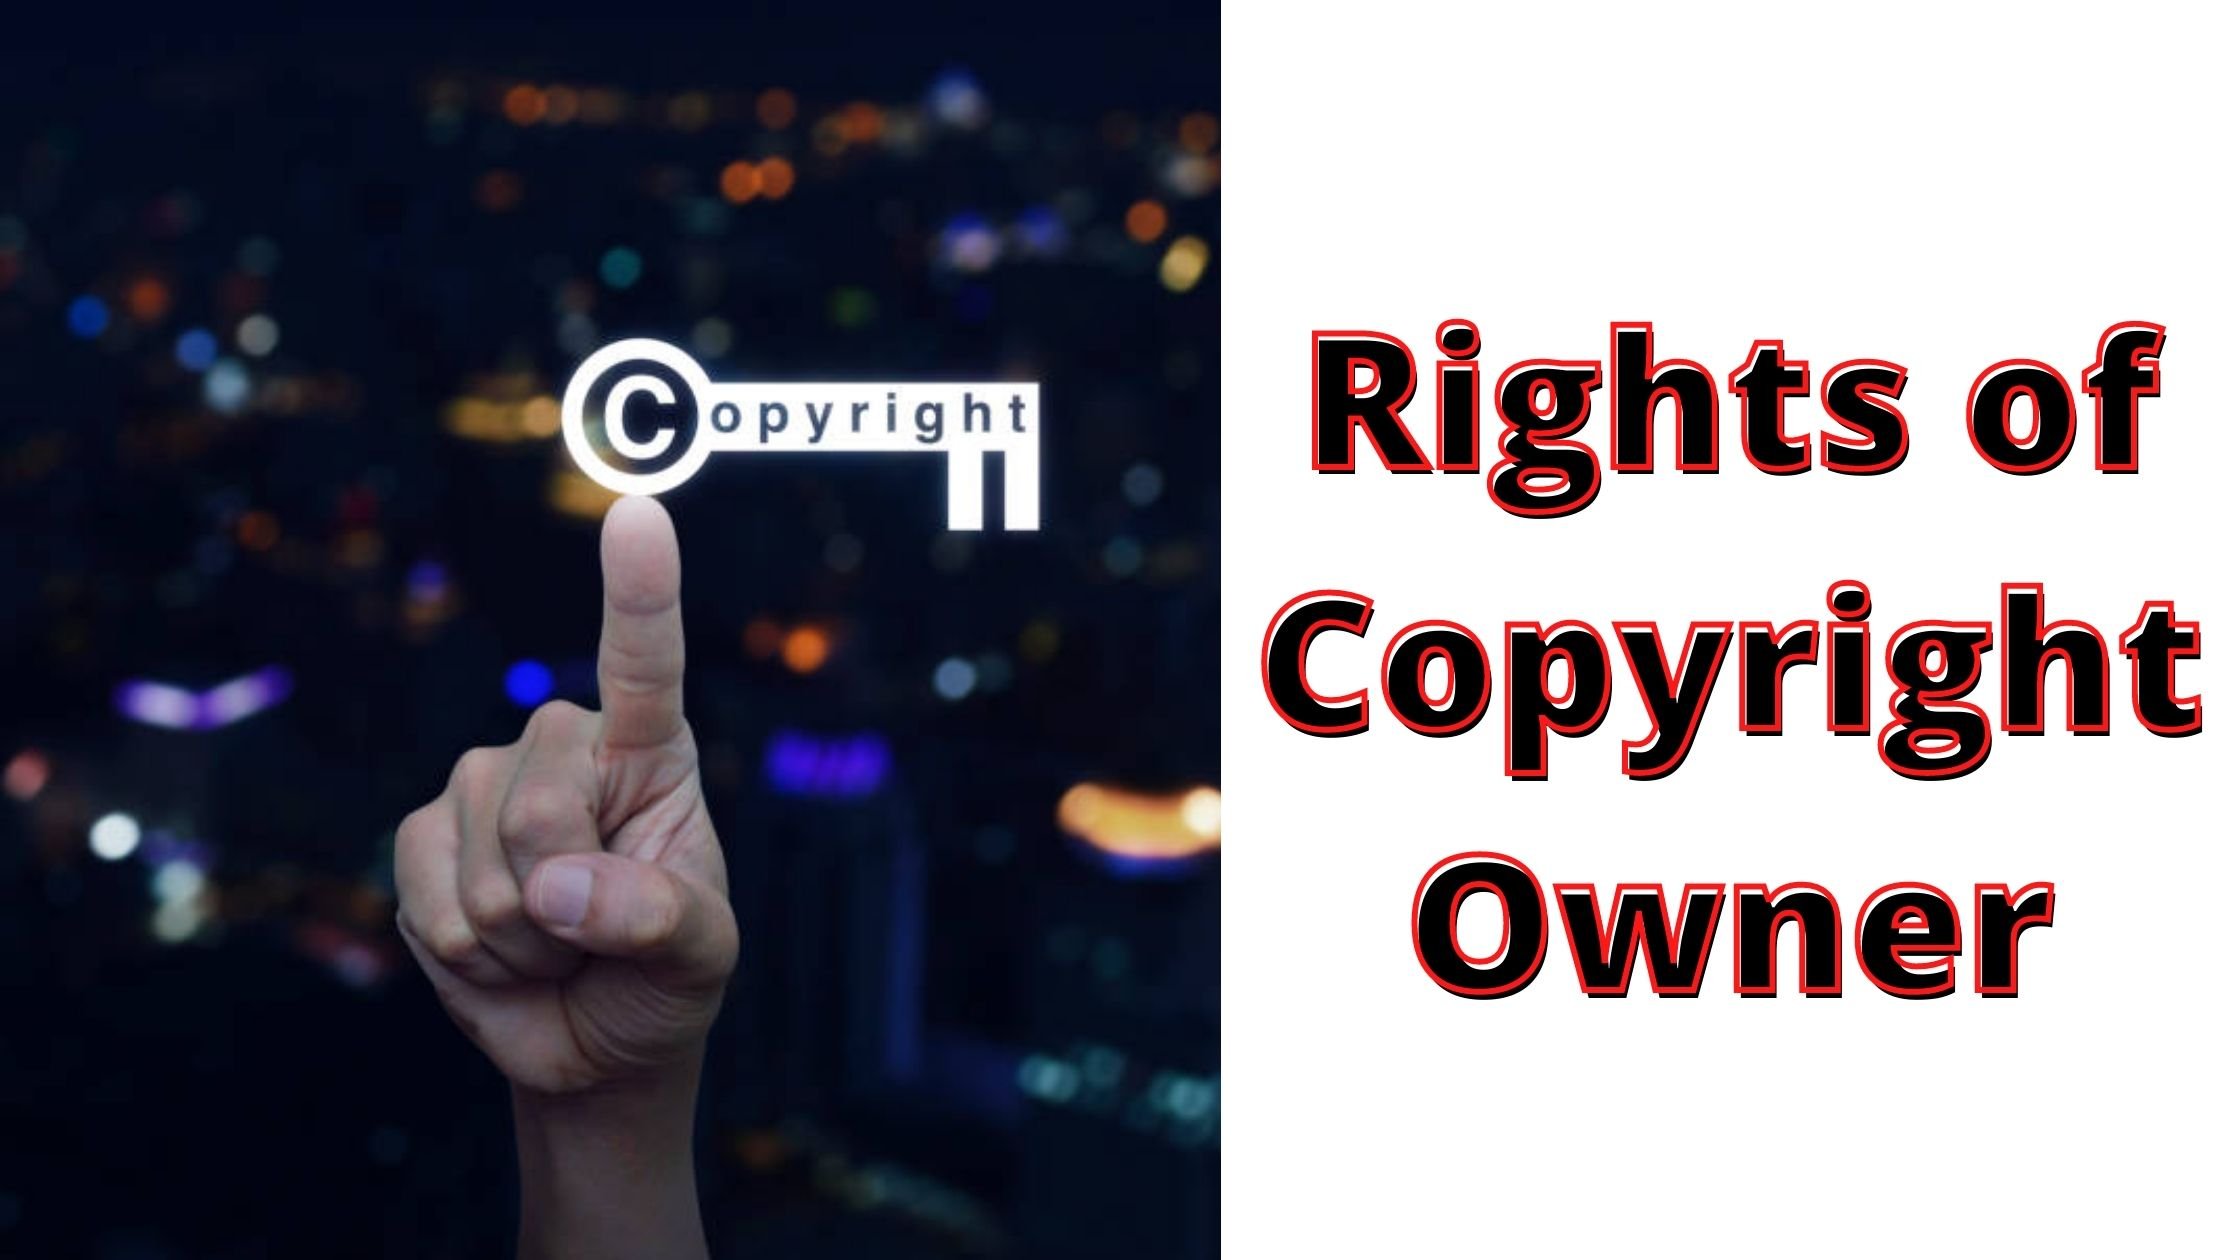 THE RIGHTS OF A COPYRIGHT OWNER